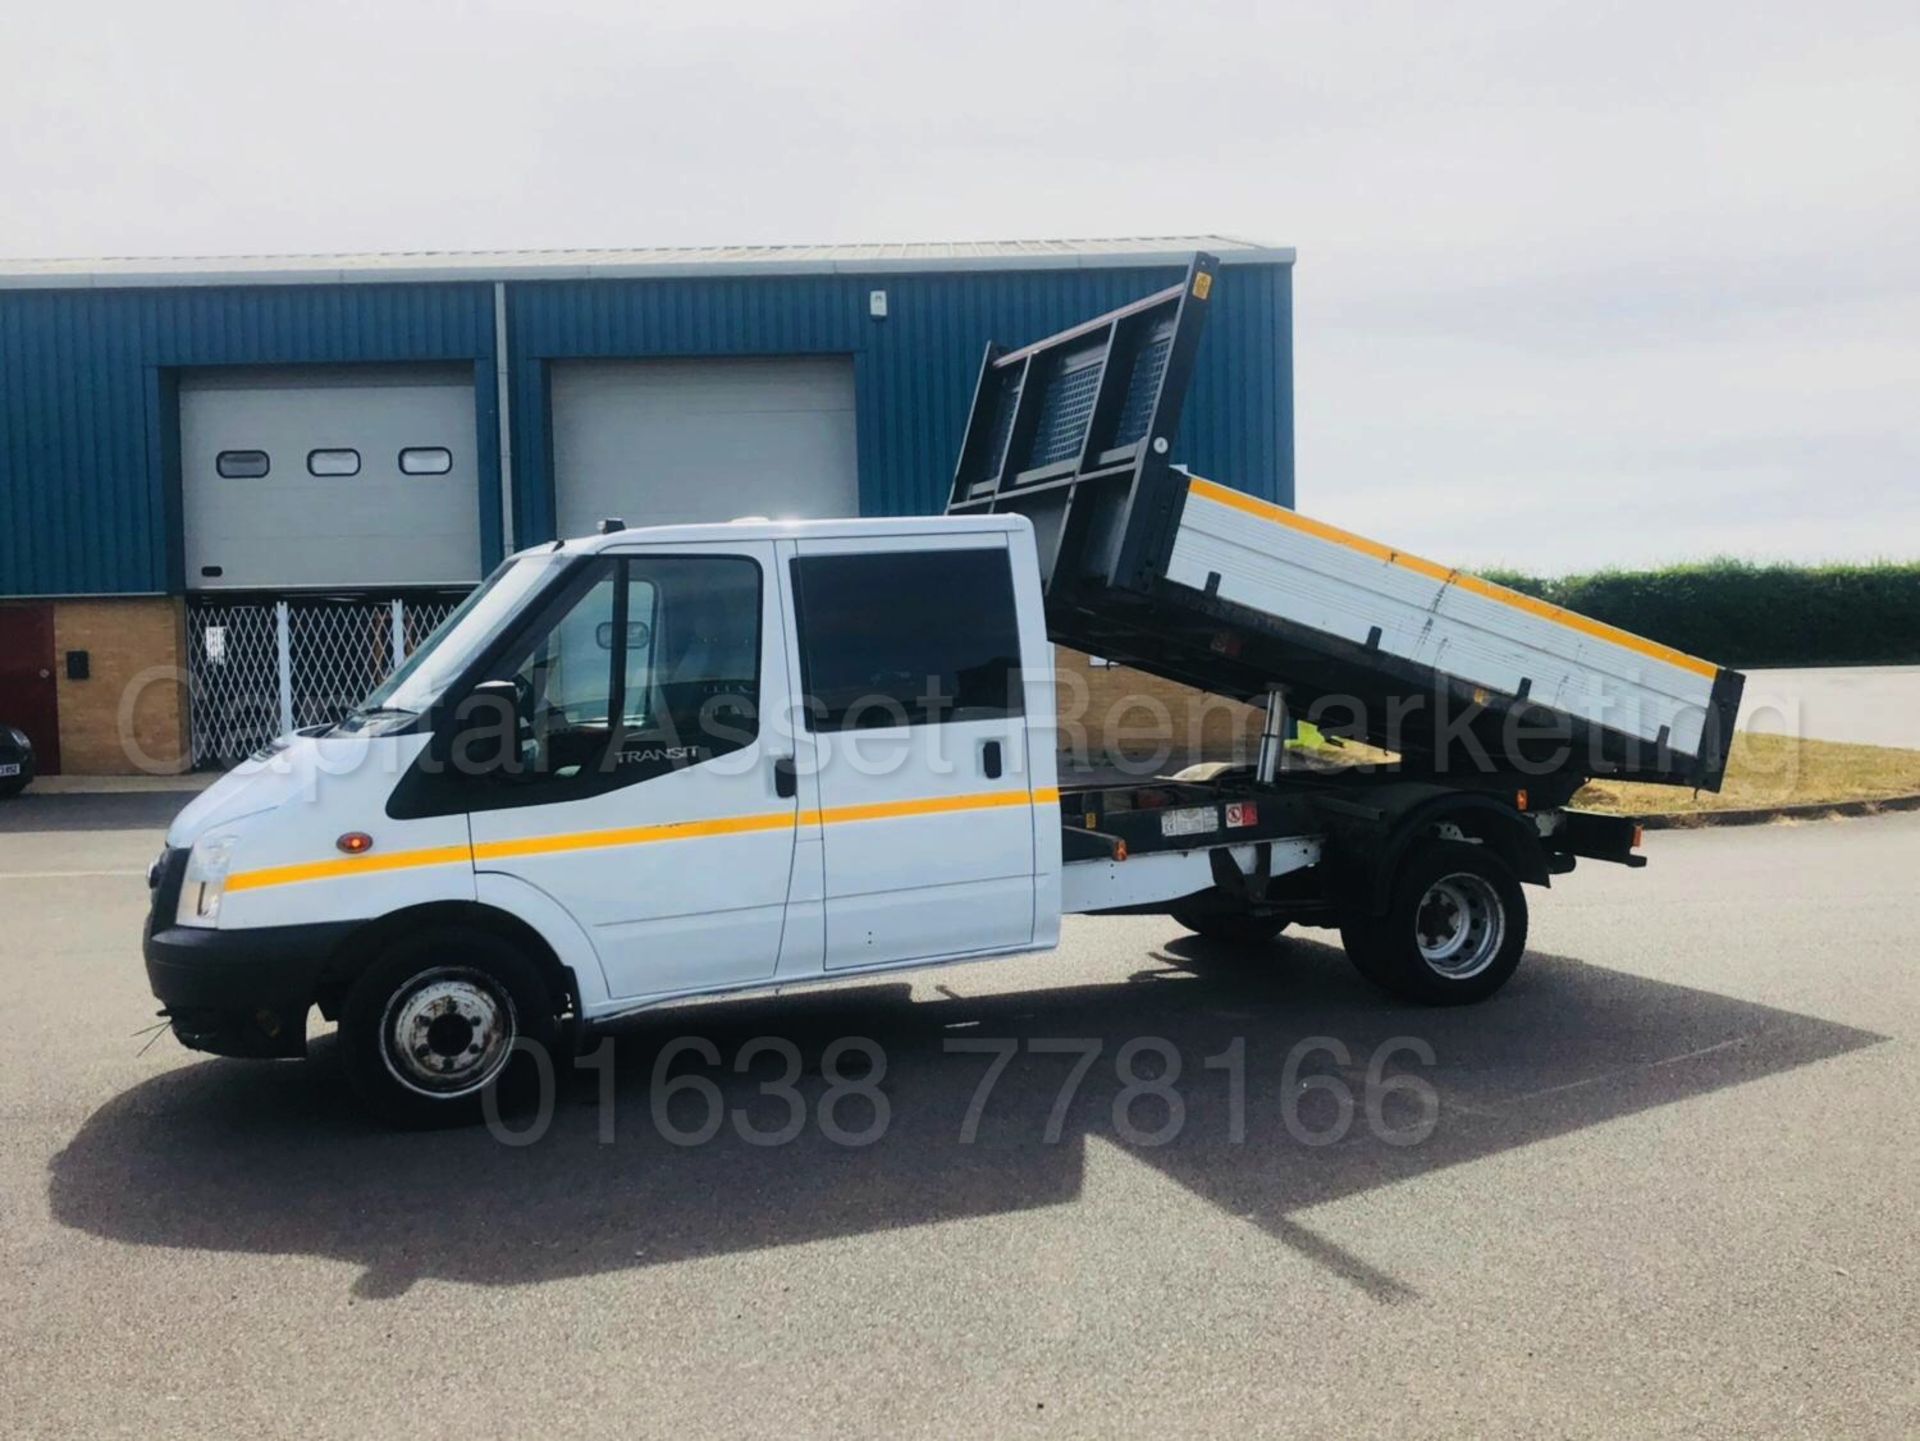 FORD TRANSIT 125 T350L RWD 'DOUBLE CAB TIPPER' (2014) '2.2 TDCI - 125 BHP - 6 SPEED' **3500 KG** - Image 34 of 35